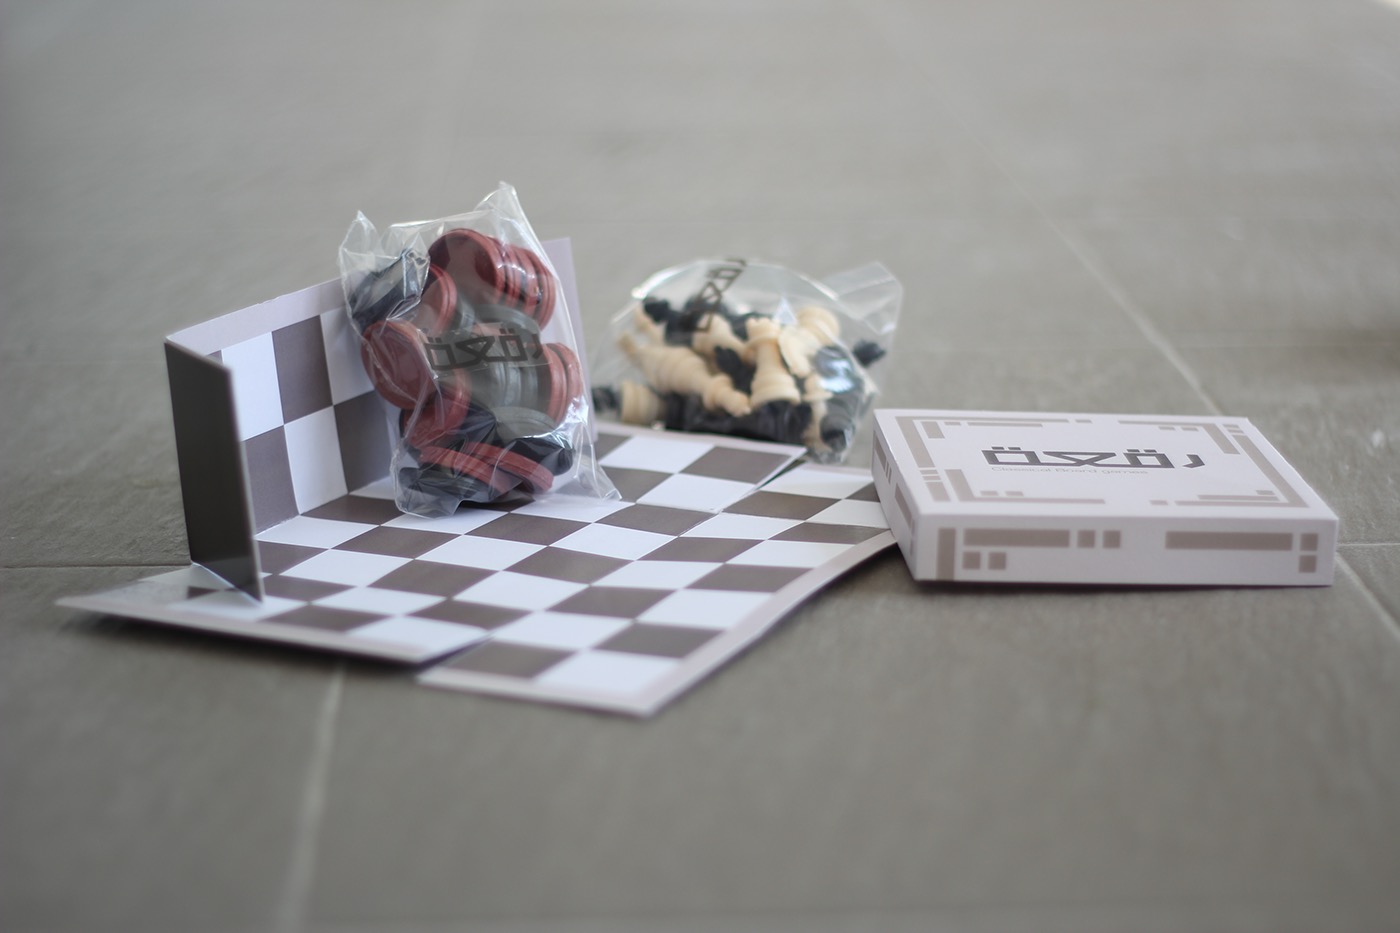 Packaging chess checkers board games package Bahrain